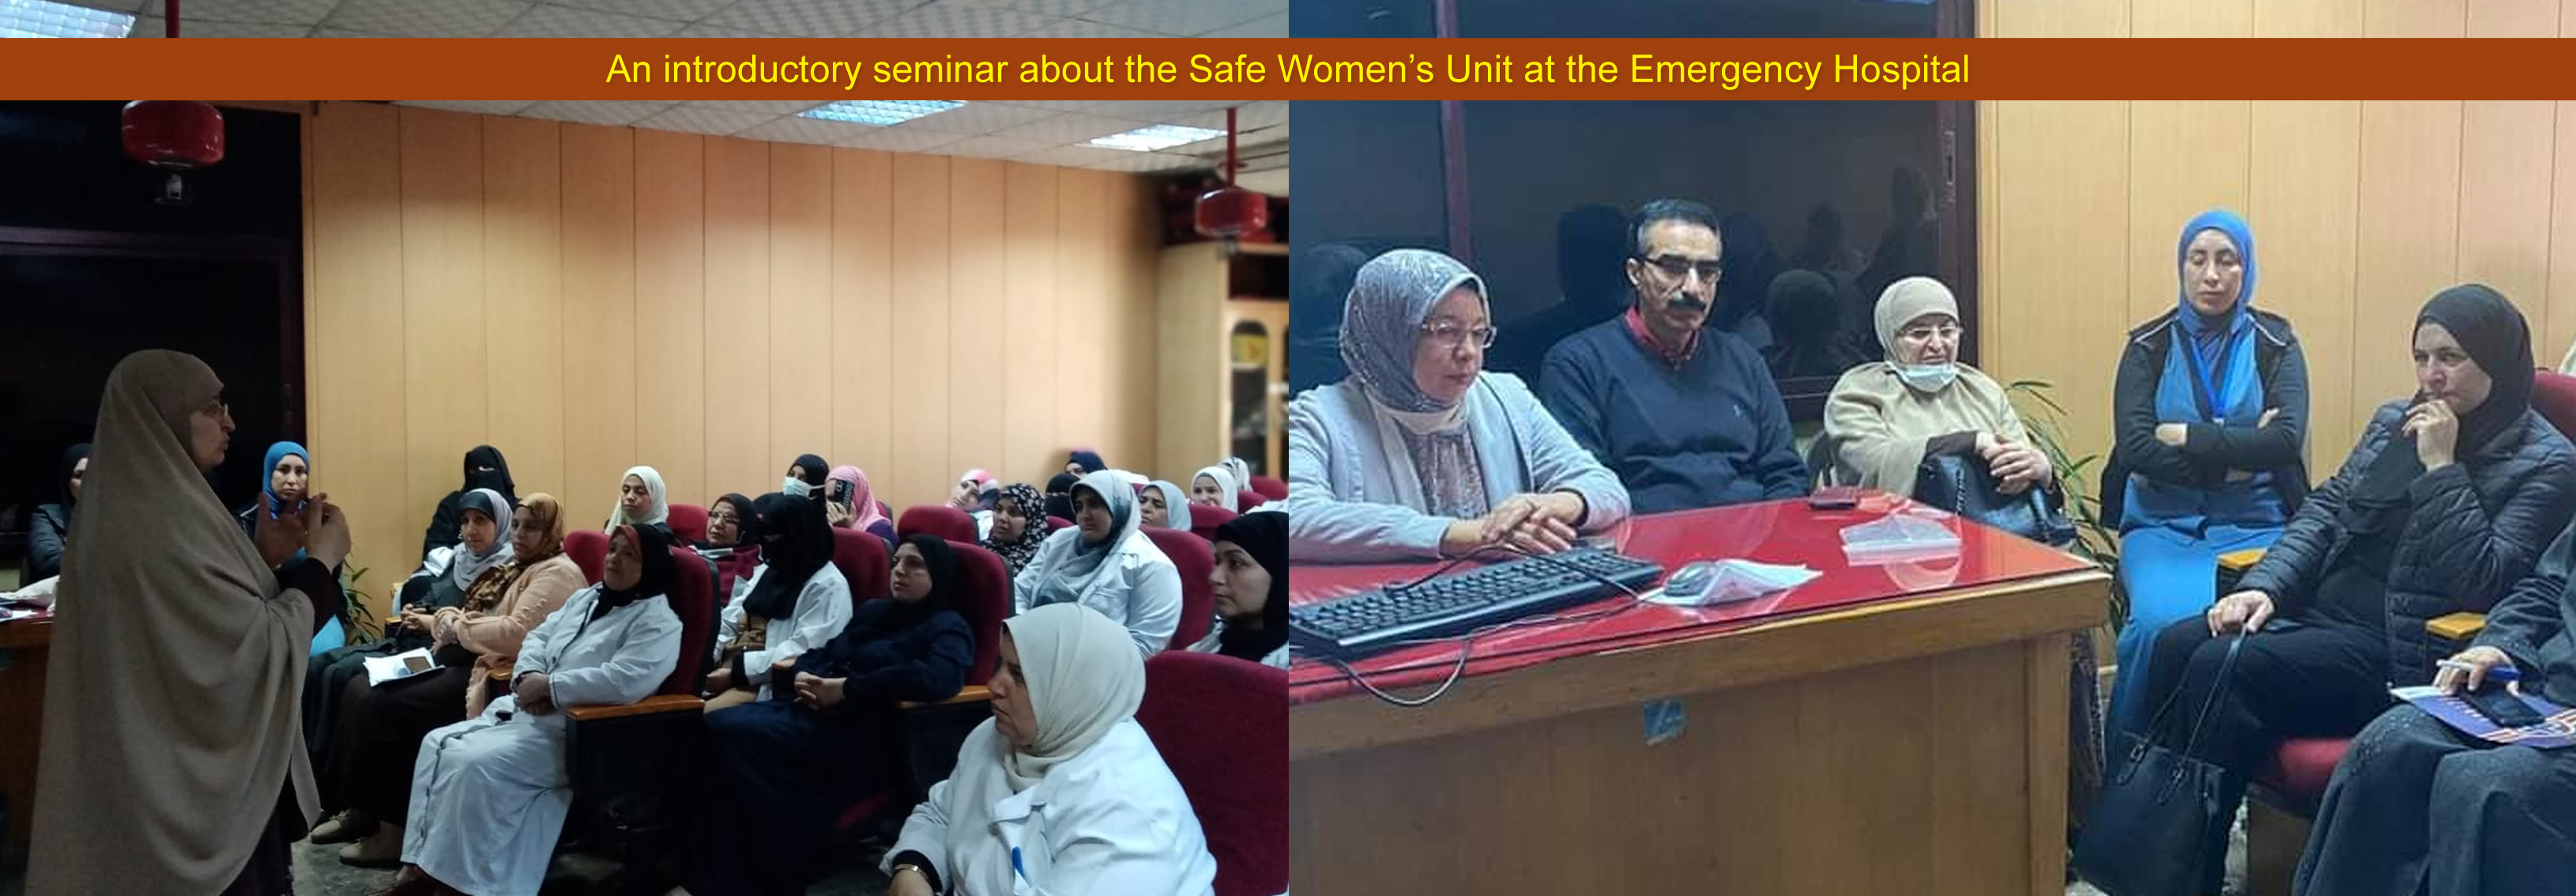 An introductory seminar about the Safe Women’s Unit at the Emergency Hospital